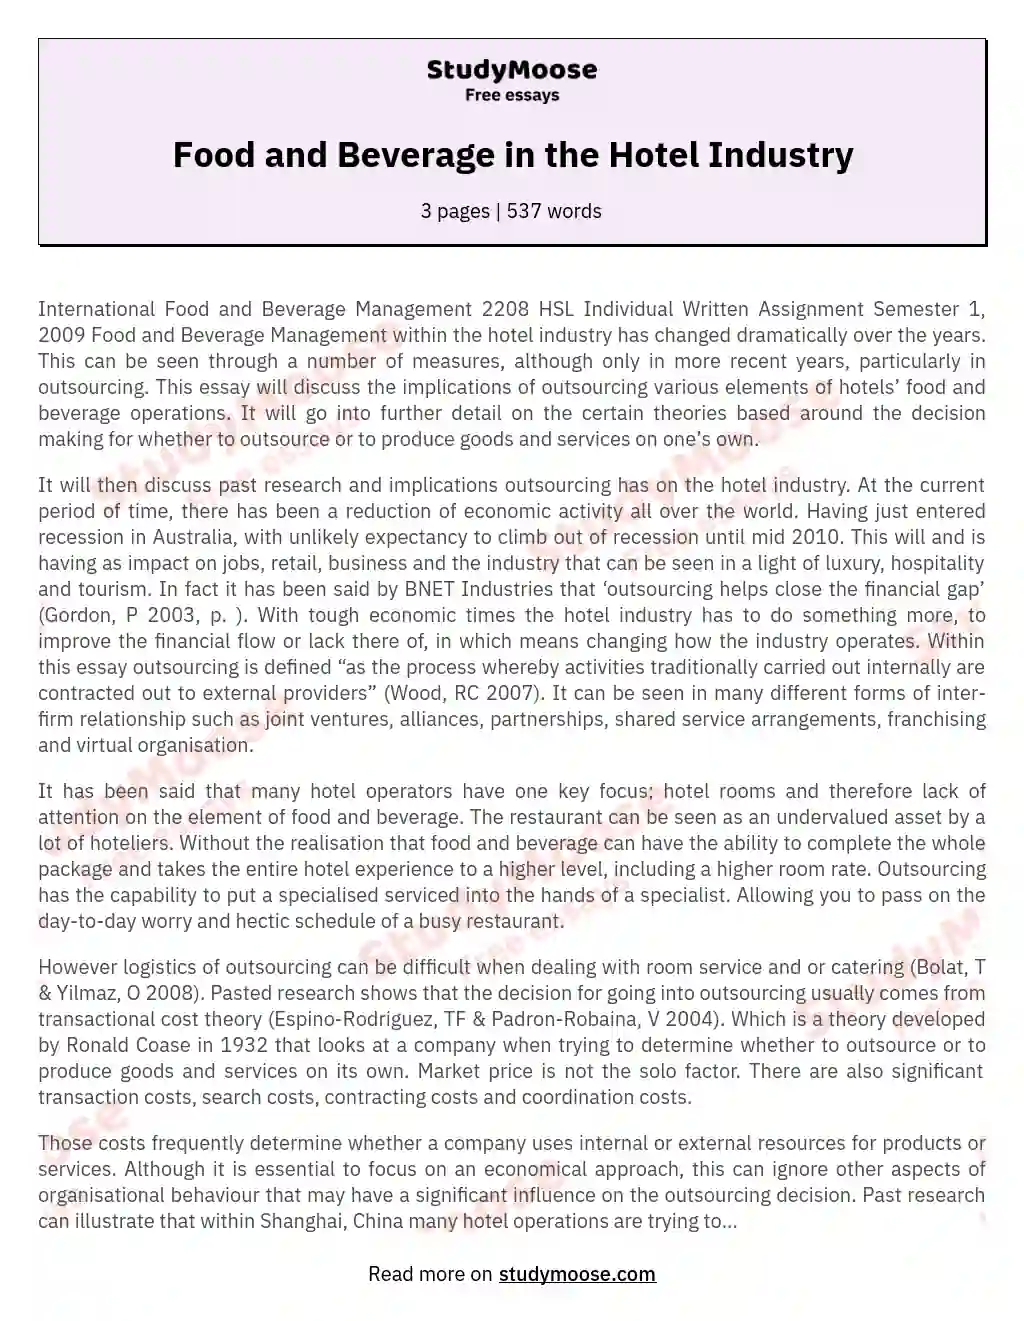 Food and Beverage in the Hotel Industry essay